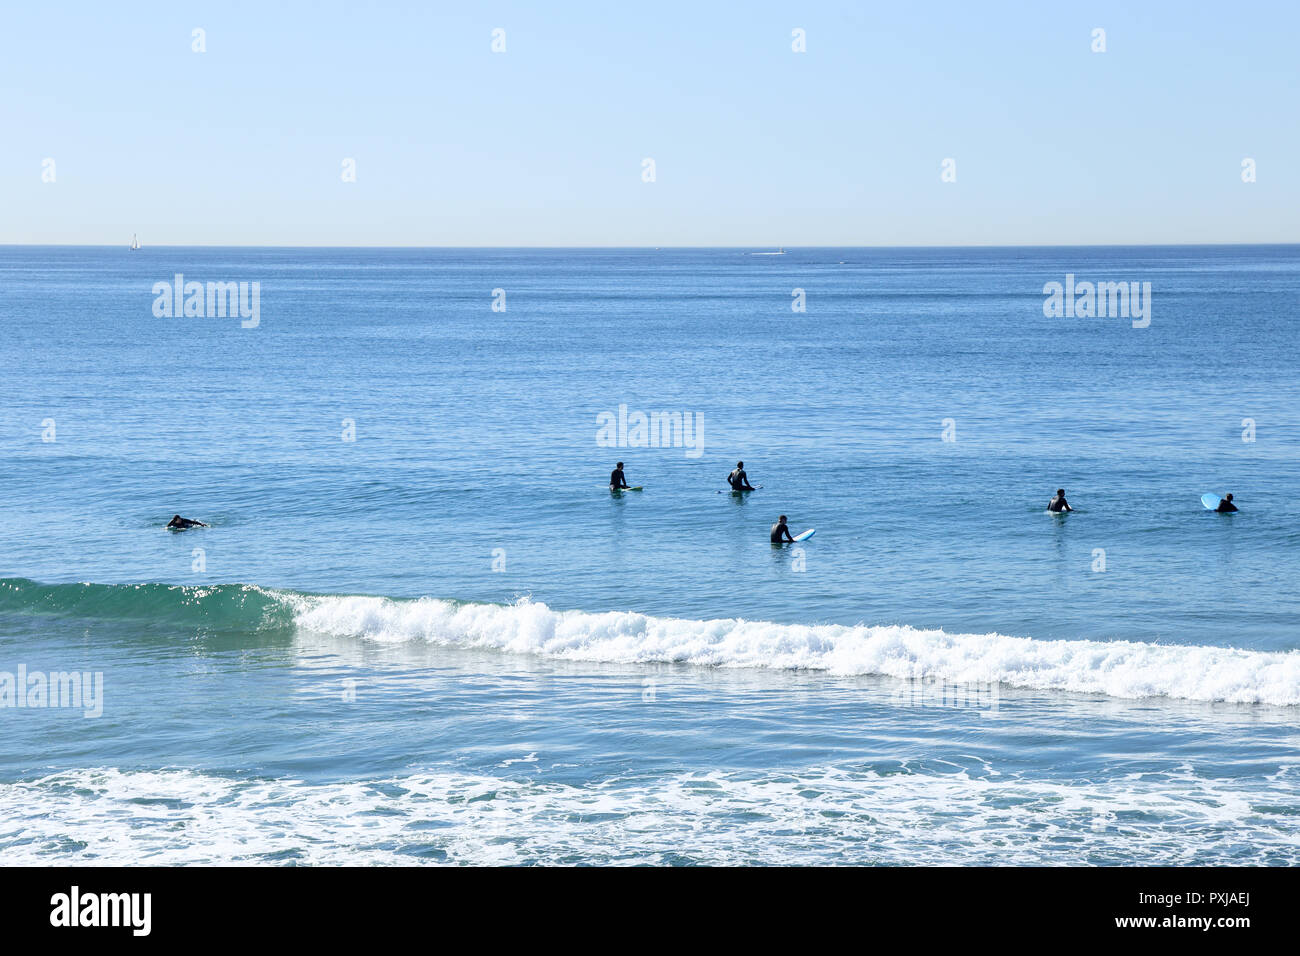 Surfers waiting for a wave at Venice beach, California Stock Photo